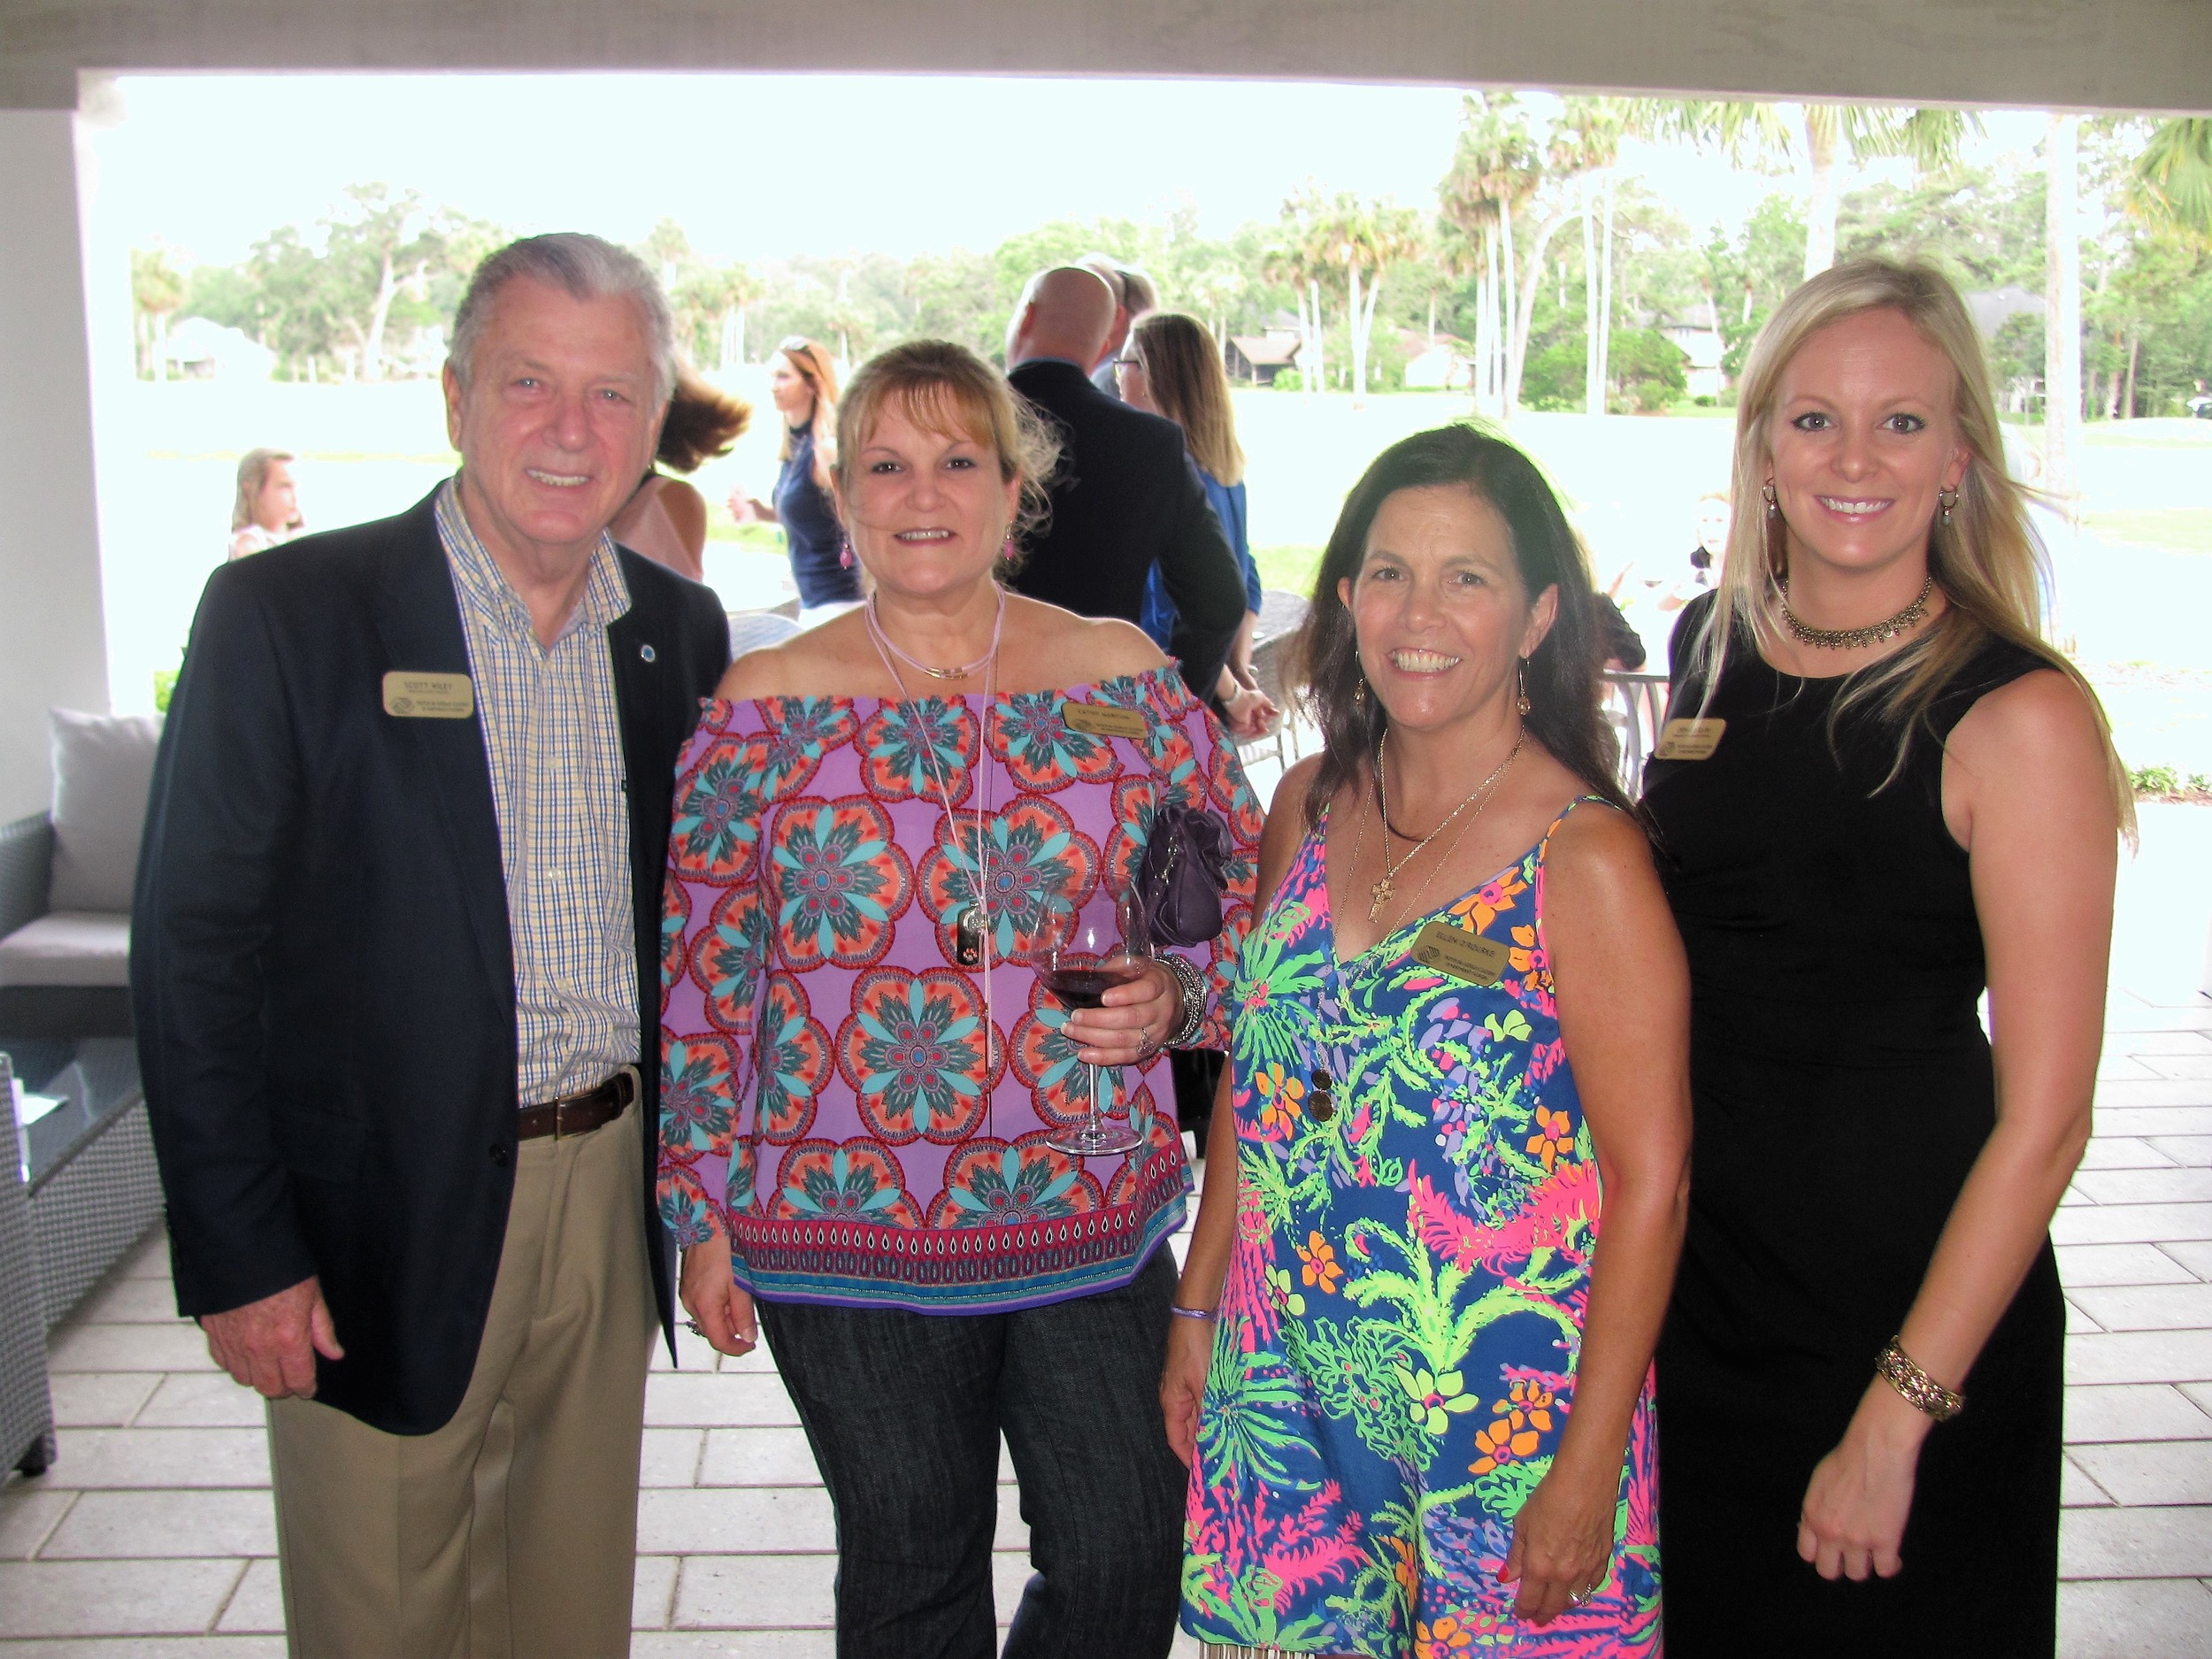 Scott Wiley, Cathy Marcum, Ellen O’Rourke and Erin Outlaw of the Beaches Boys and Girls Beaches Club